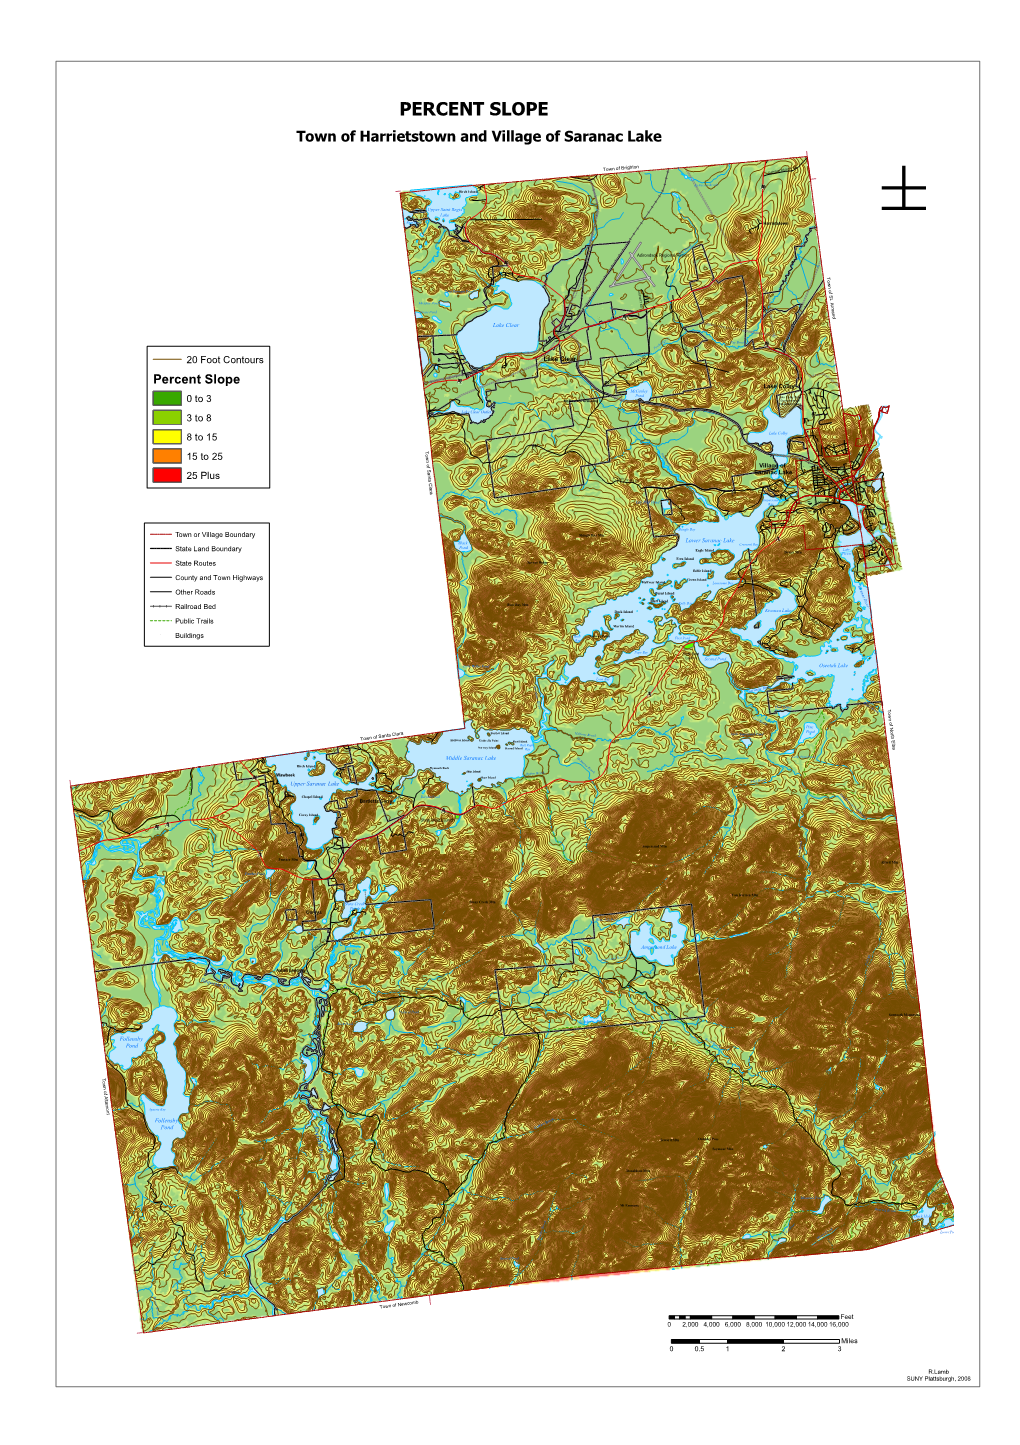 PERCENT SLOPE Town of Harrietstown and Village of Saranac Lake